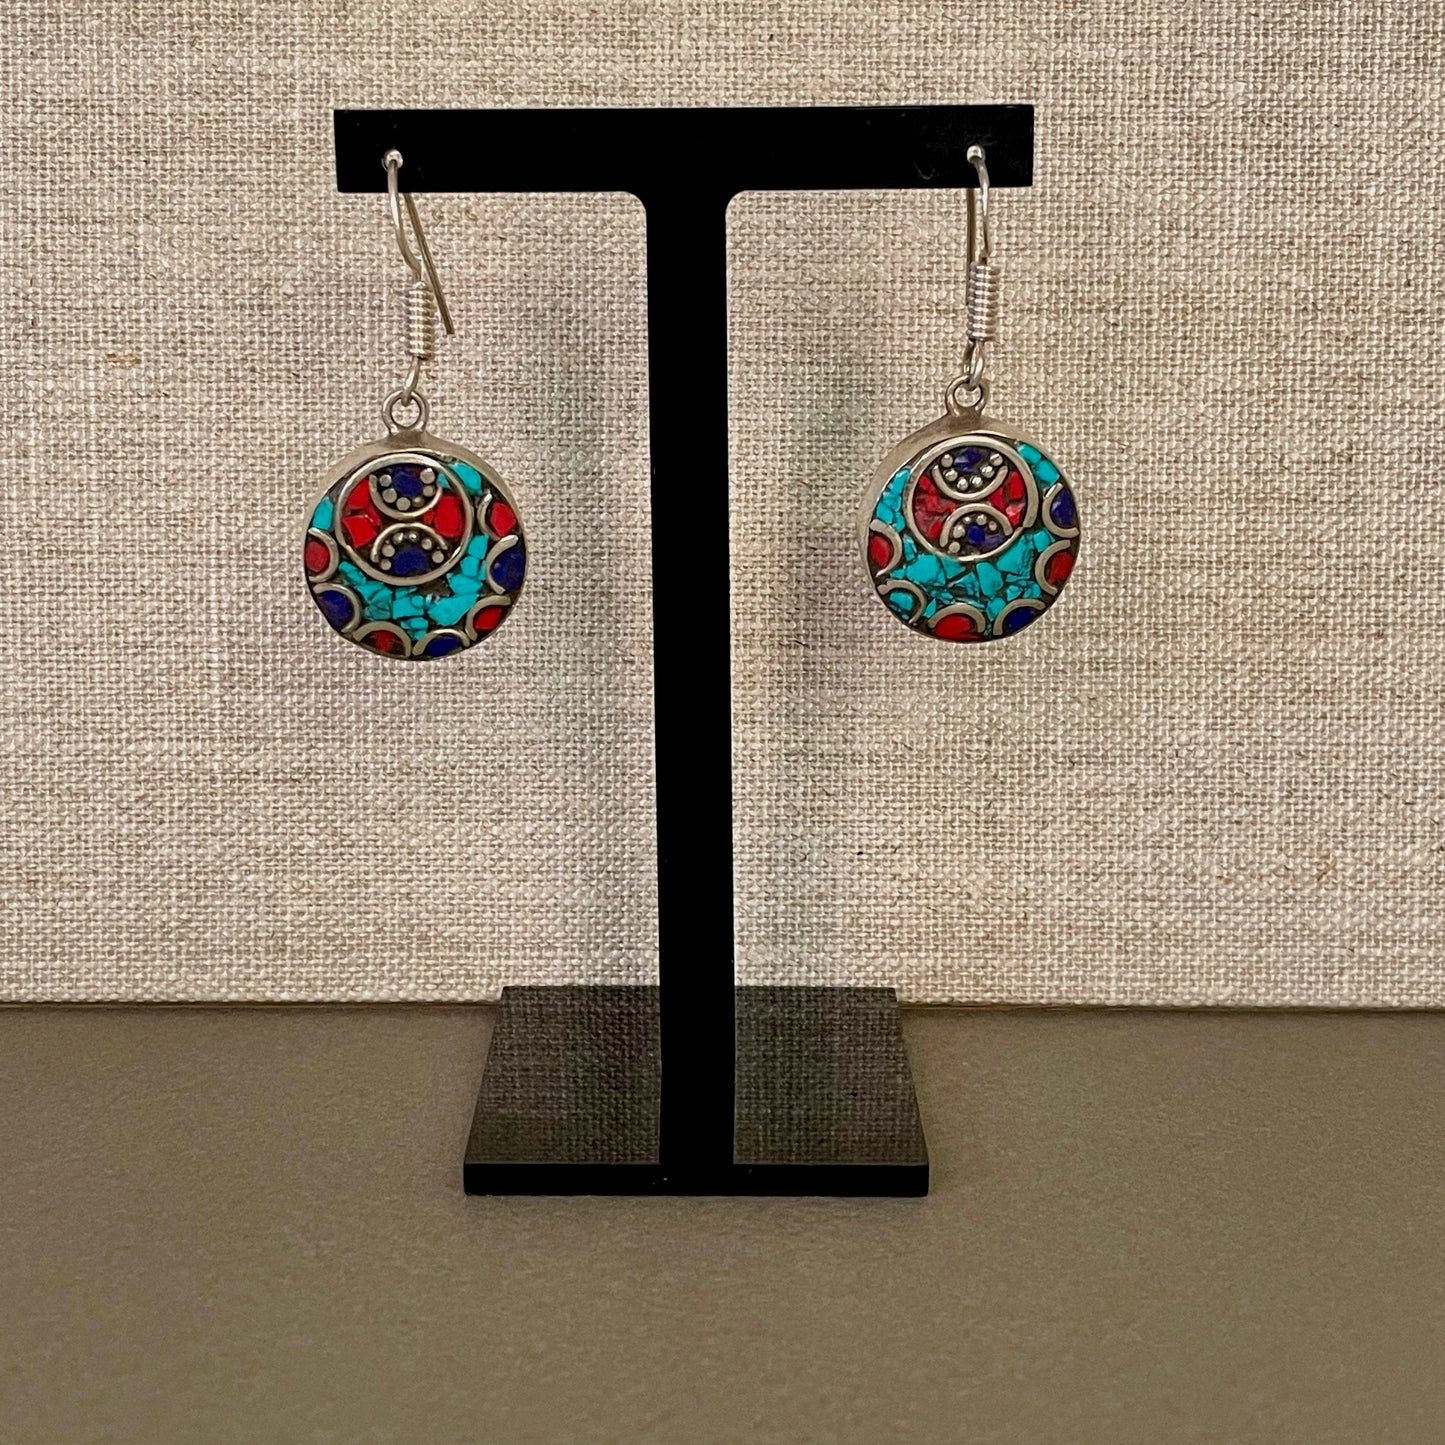 Berber Silver Turquoise & Red Stone Round Earrings on stand